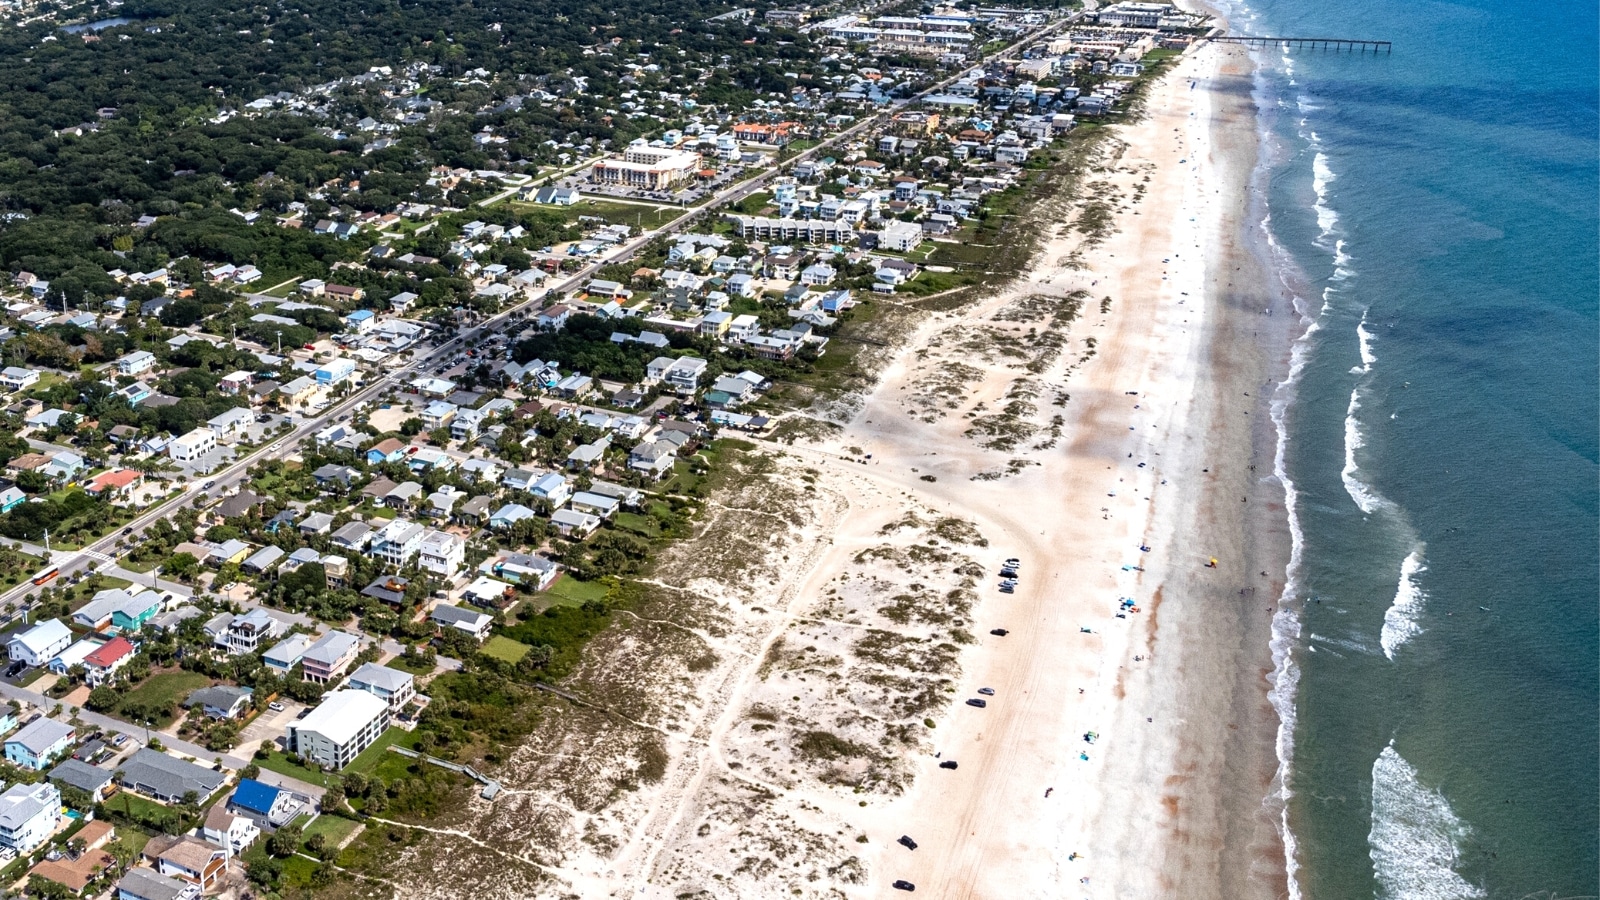 The aerial photograph captures the panoramic view of St. Augustine Beach in Florida. The image presents a serene coastal landscape, with the sandy shore extending seamlessly towards the horizon. The sandy expanse is dotted with beachgoers and umbrellas.